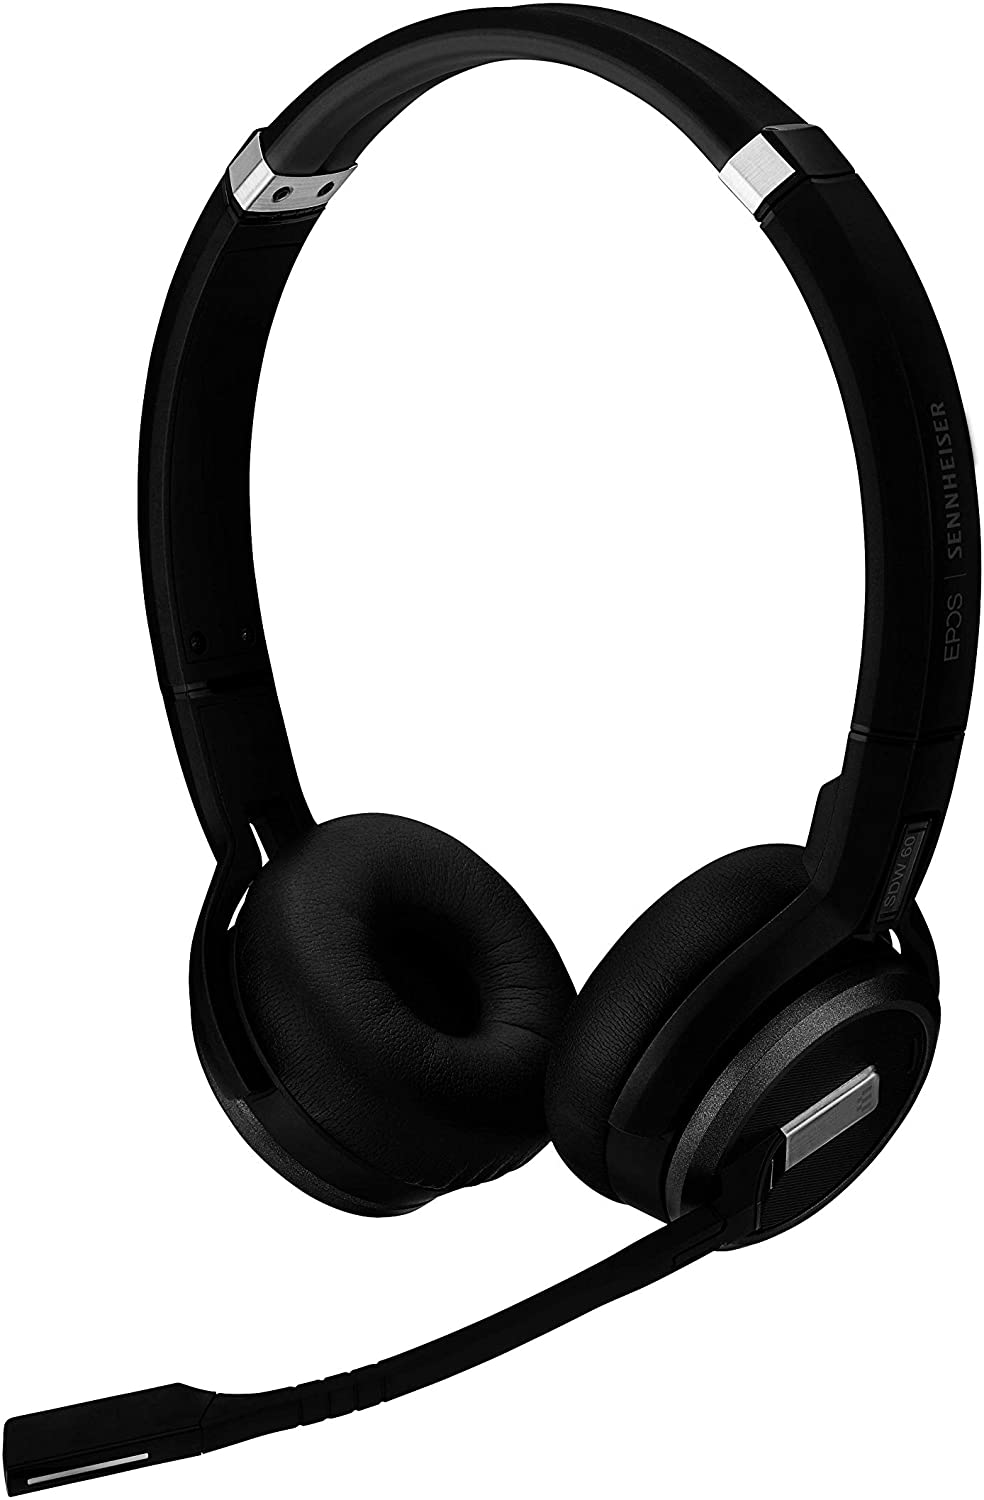 Epos Sennheiser SDW 5064 (507012) - Double-Sided (Binaural) Wireless DECT Headset for Softphone/PC &amp; Mobile Phone Connection Dual Microphone Ultra Noise Cancelling, Black